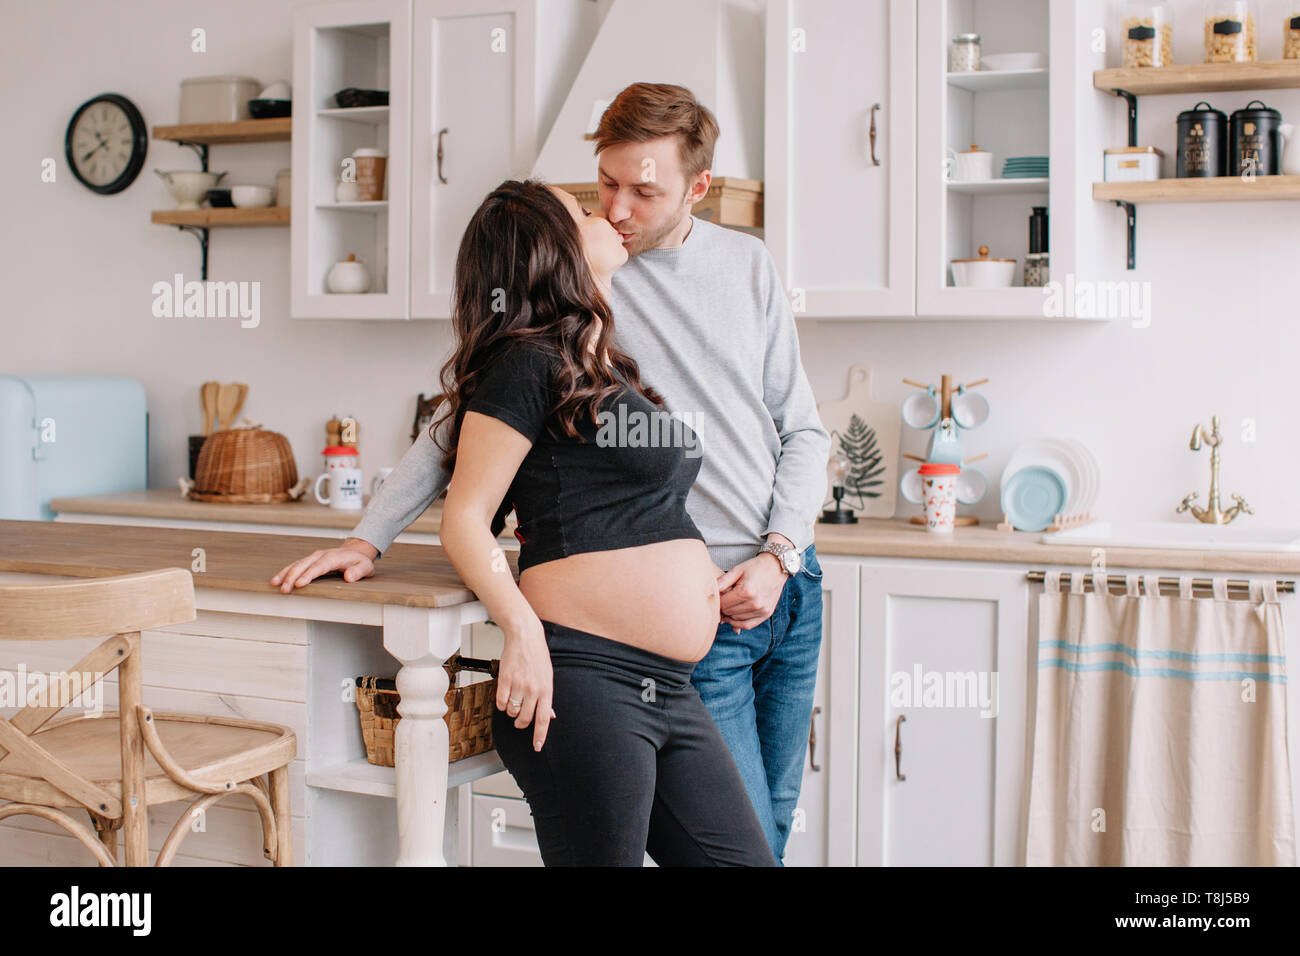 Portrait of a smiling couple kissing in the kitchen Stock Photo